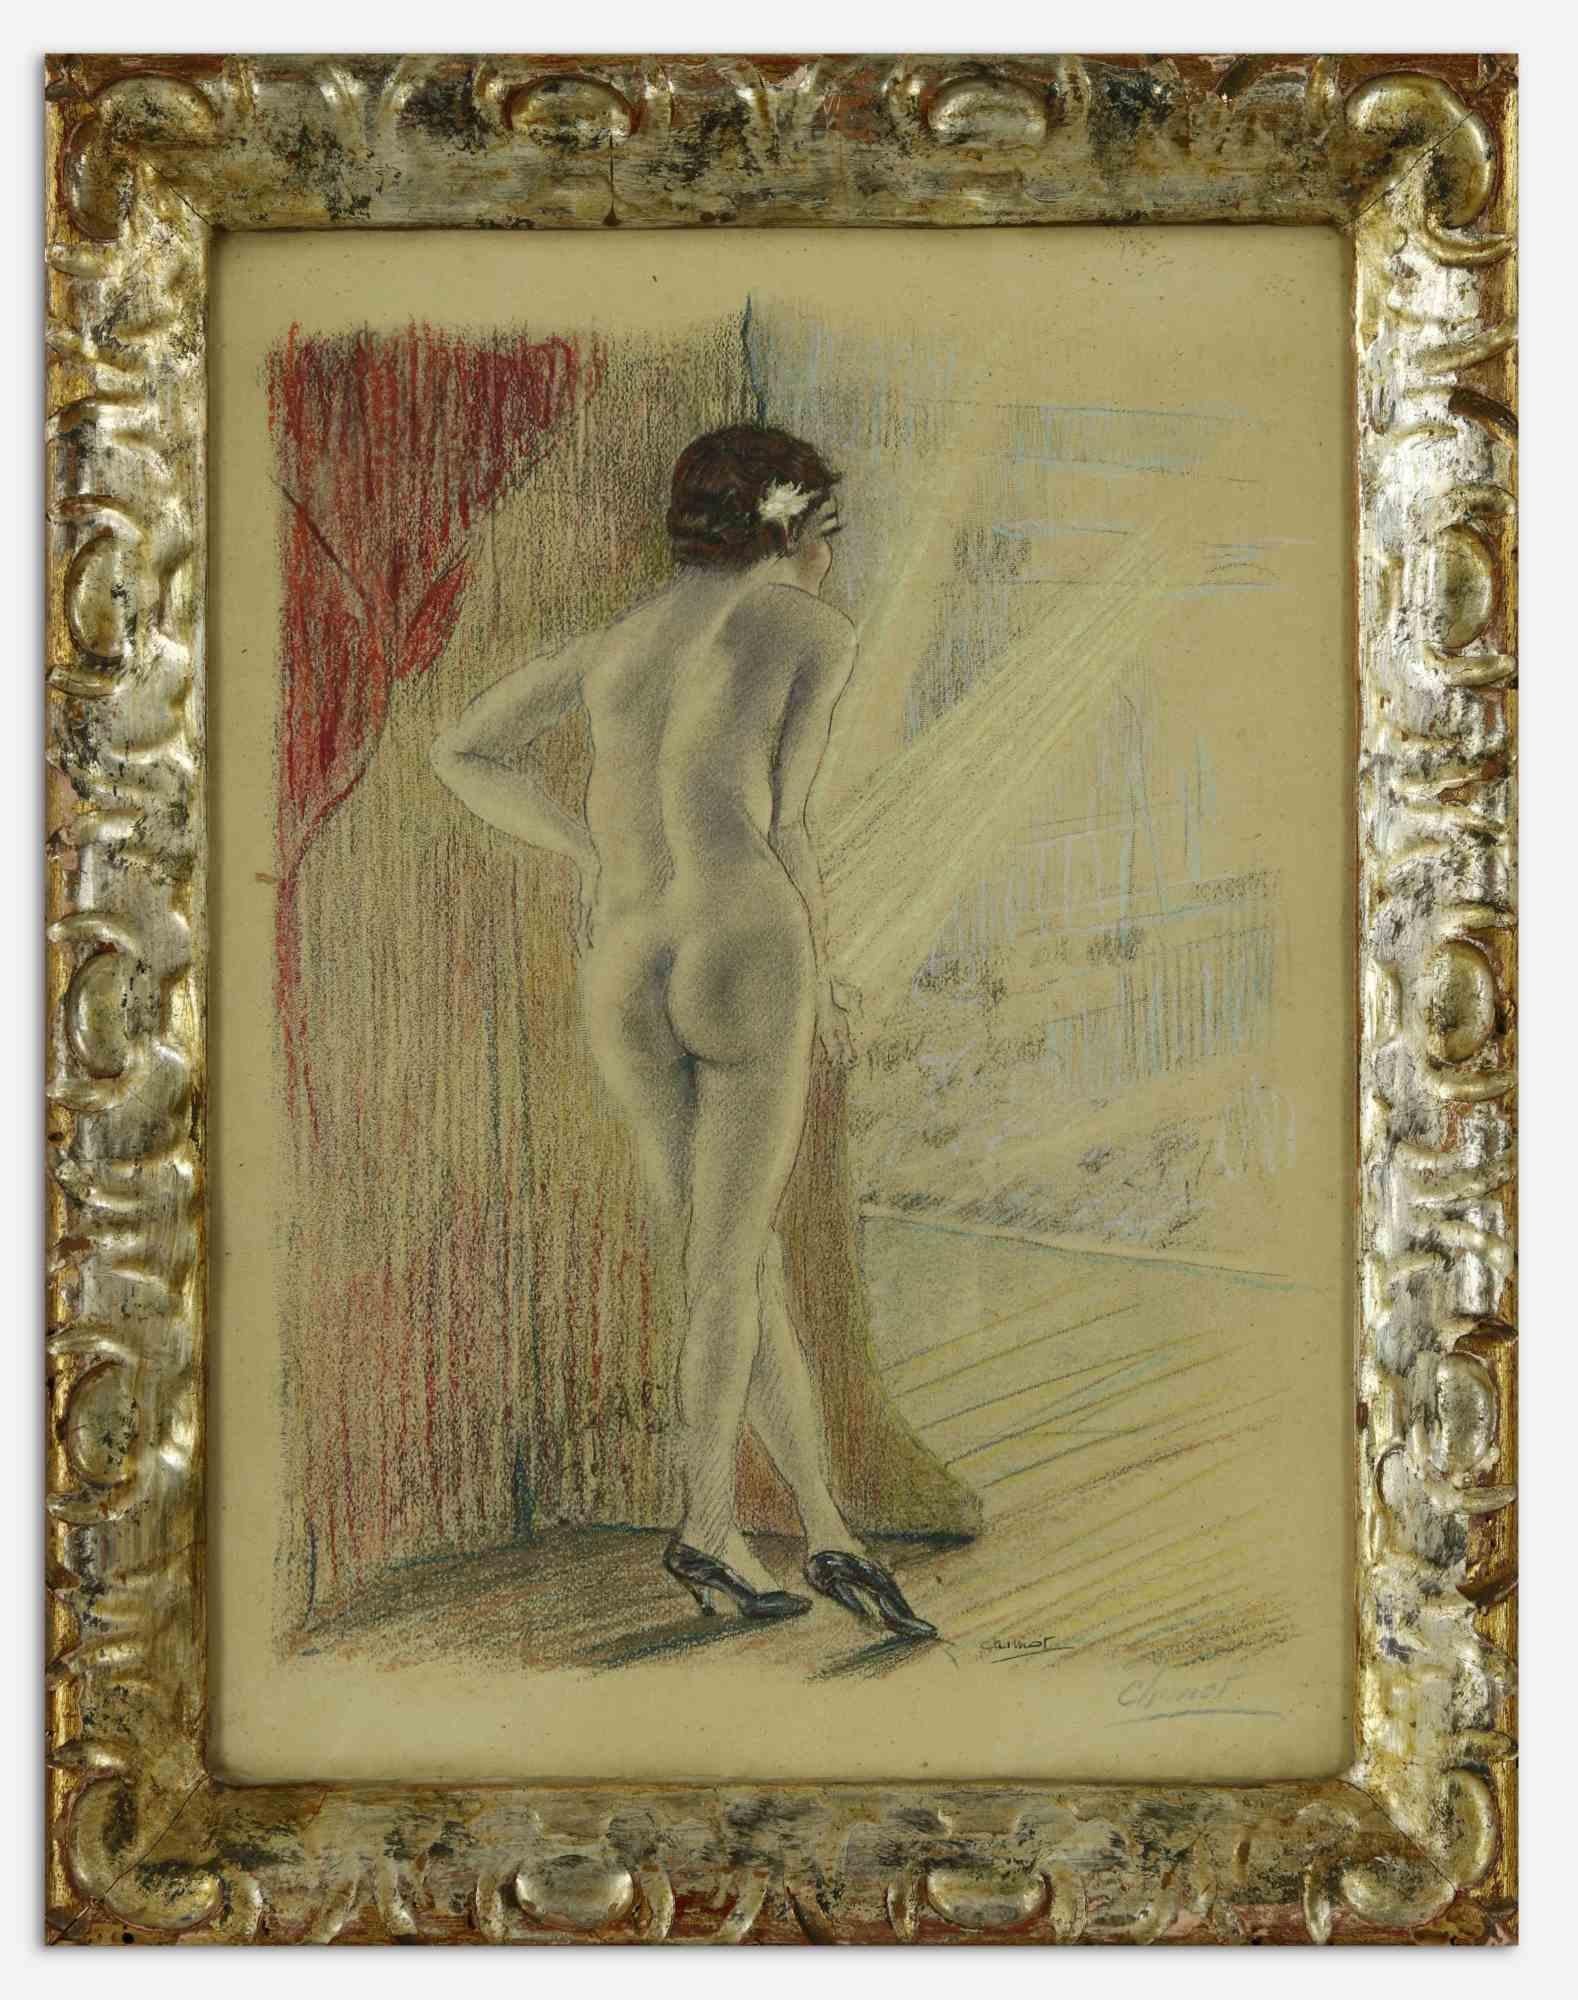 Model in theatre is an original modern artwork realized by Edouard Chimot (1880-1959) in the early 20th century.

Mixed colored lithograph

Hand signed on the lower margin

Includes frame.

Good conditions.

